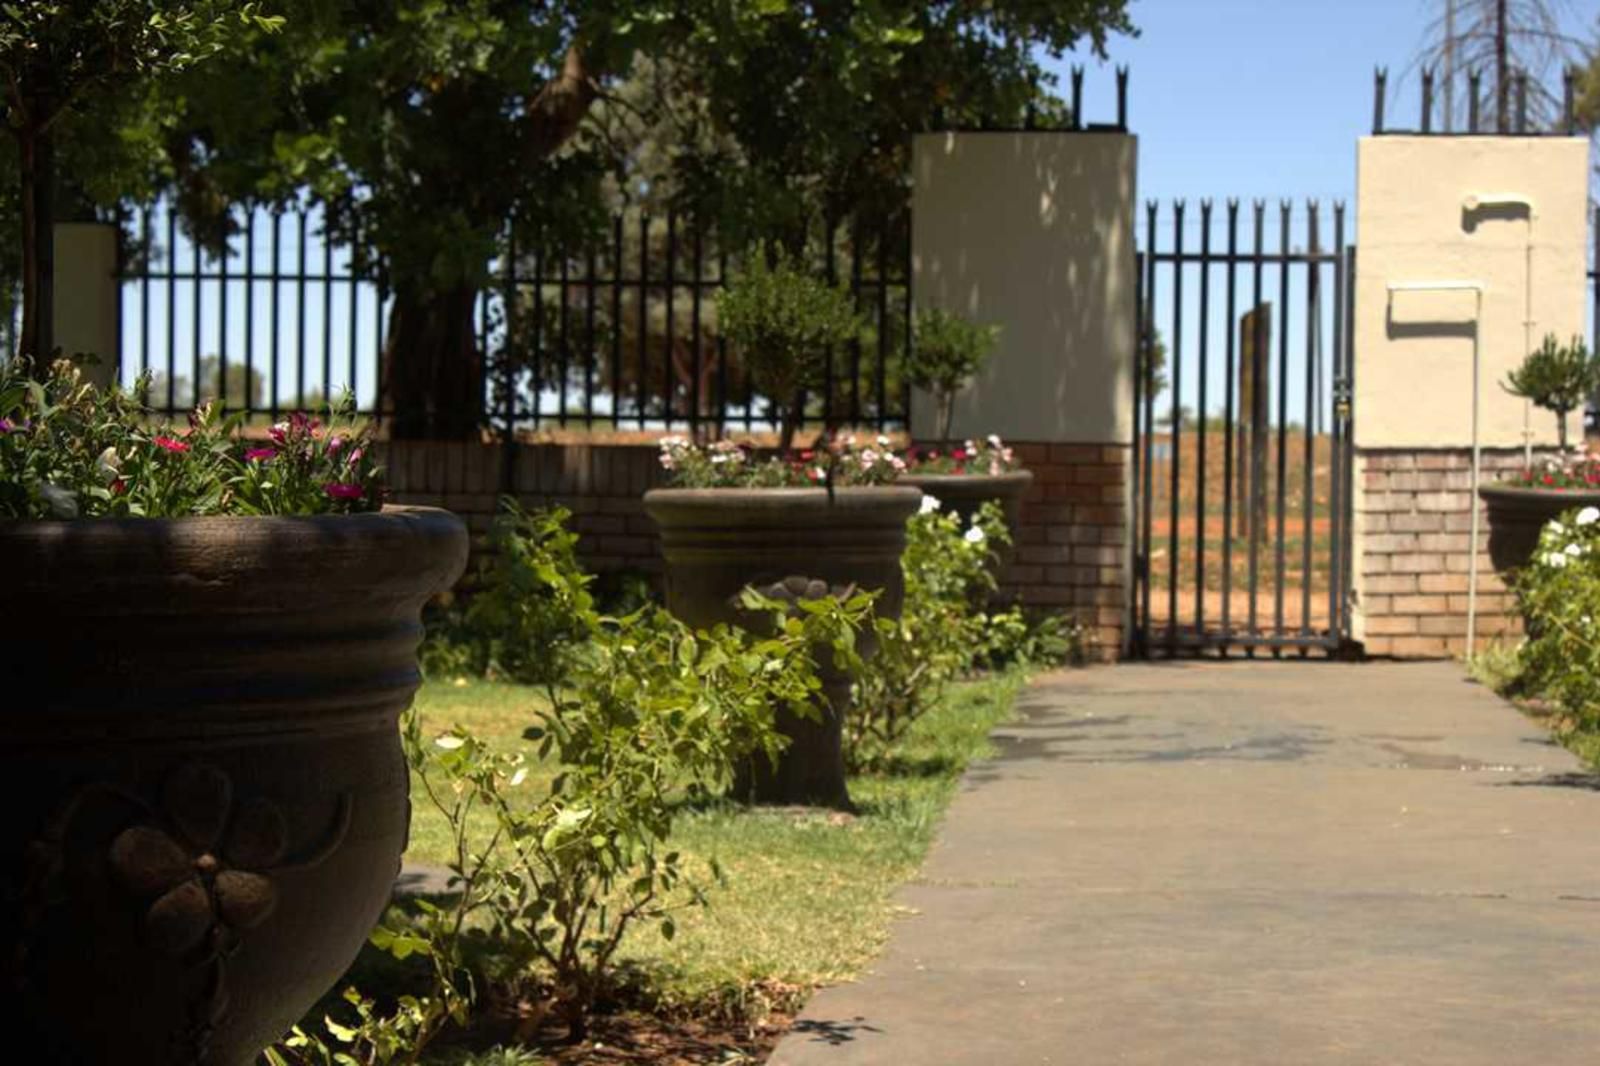 Immanuel Guest House Warrenton Northern Cape South Africa Gate, Architecture